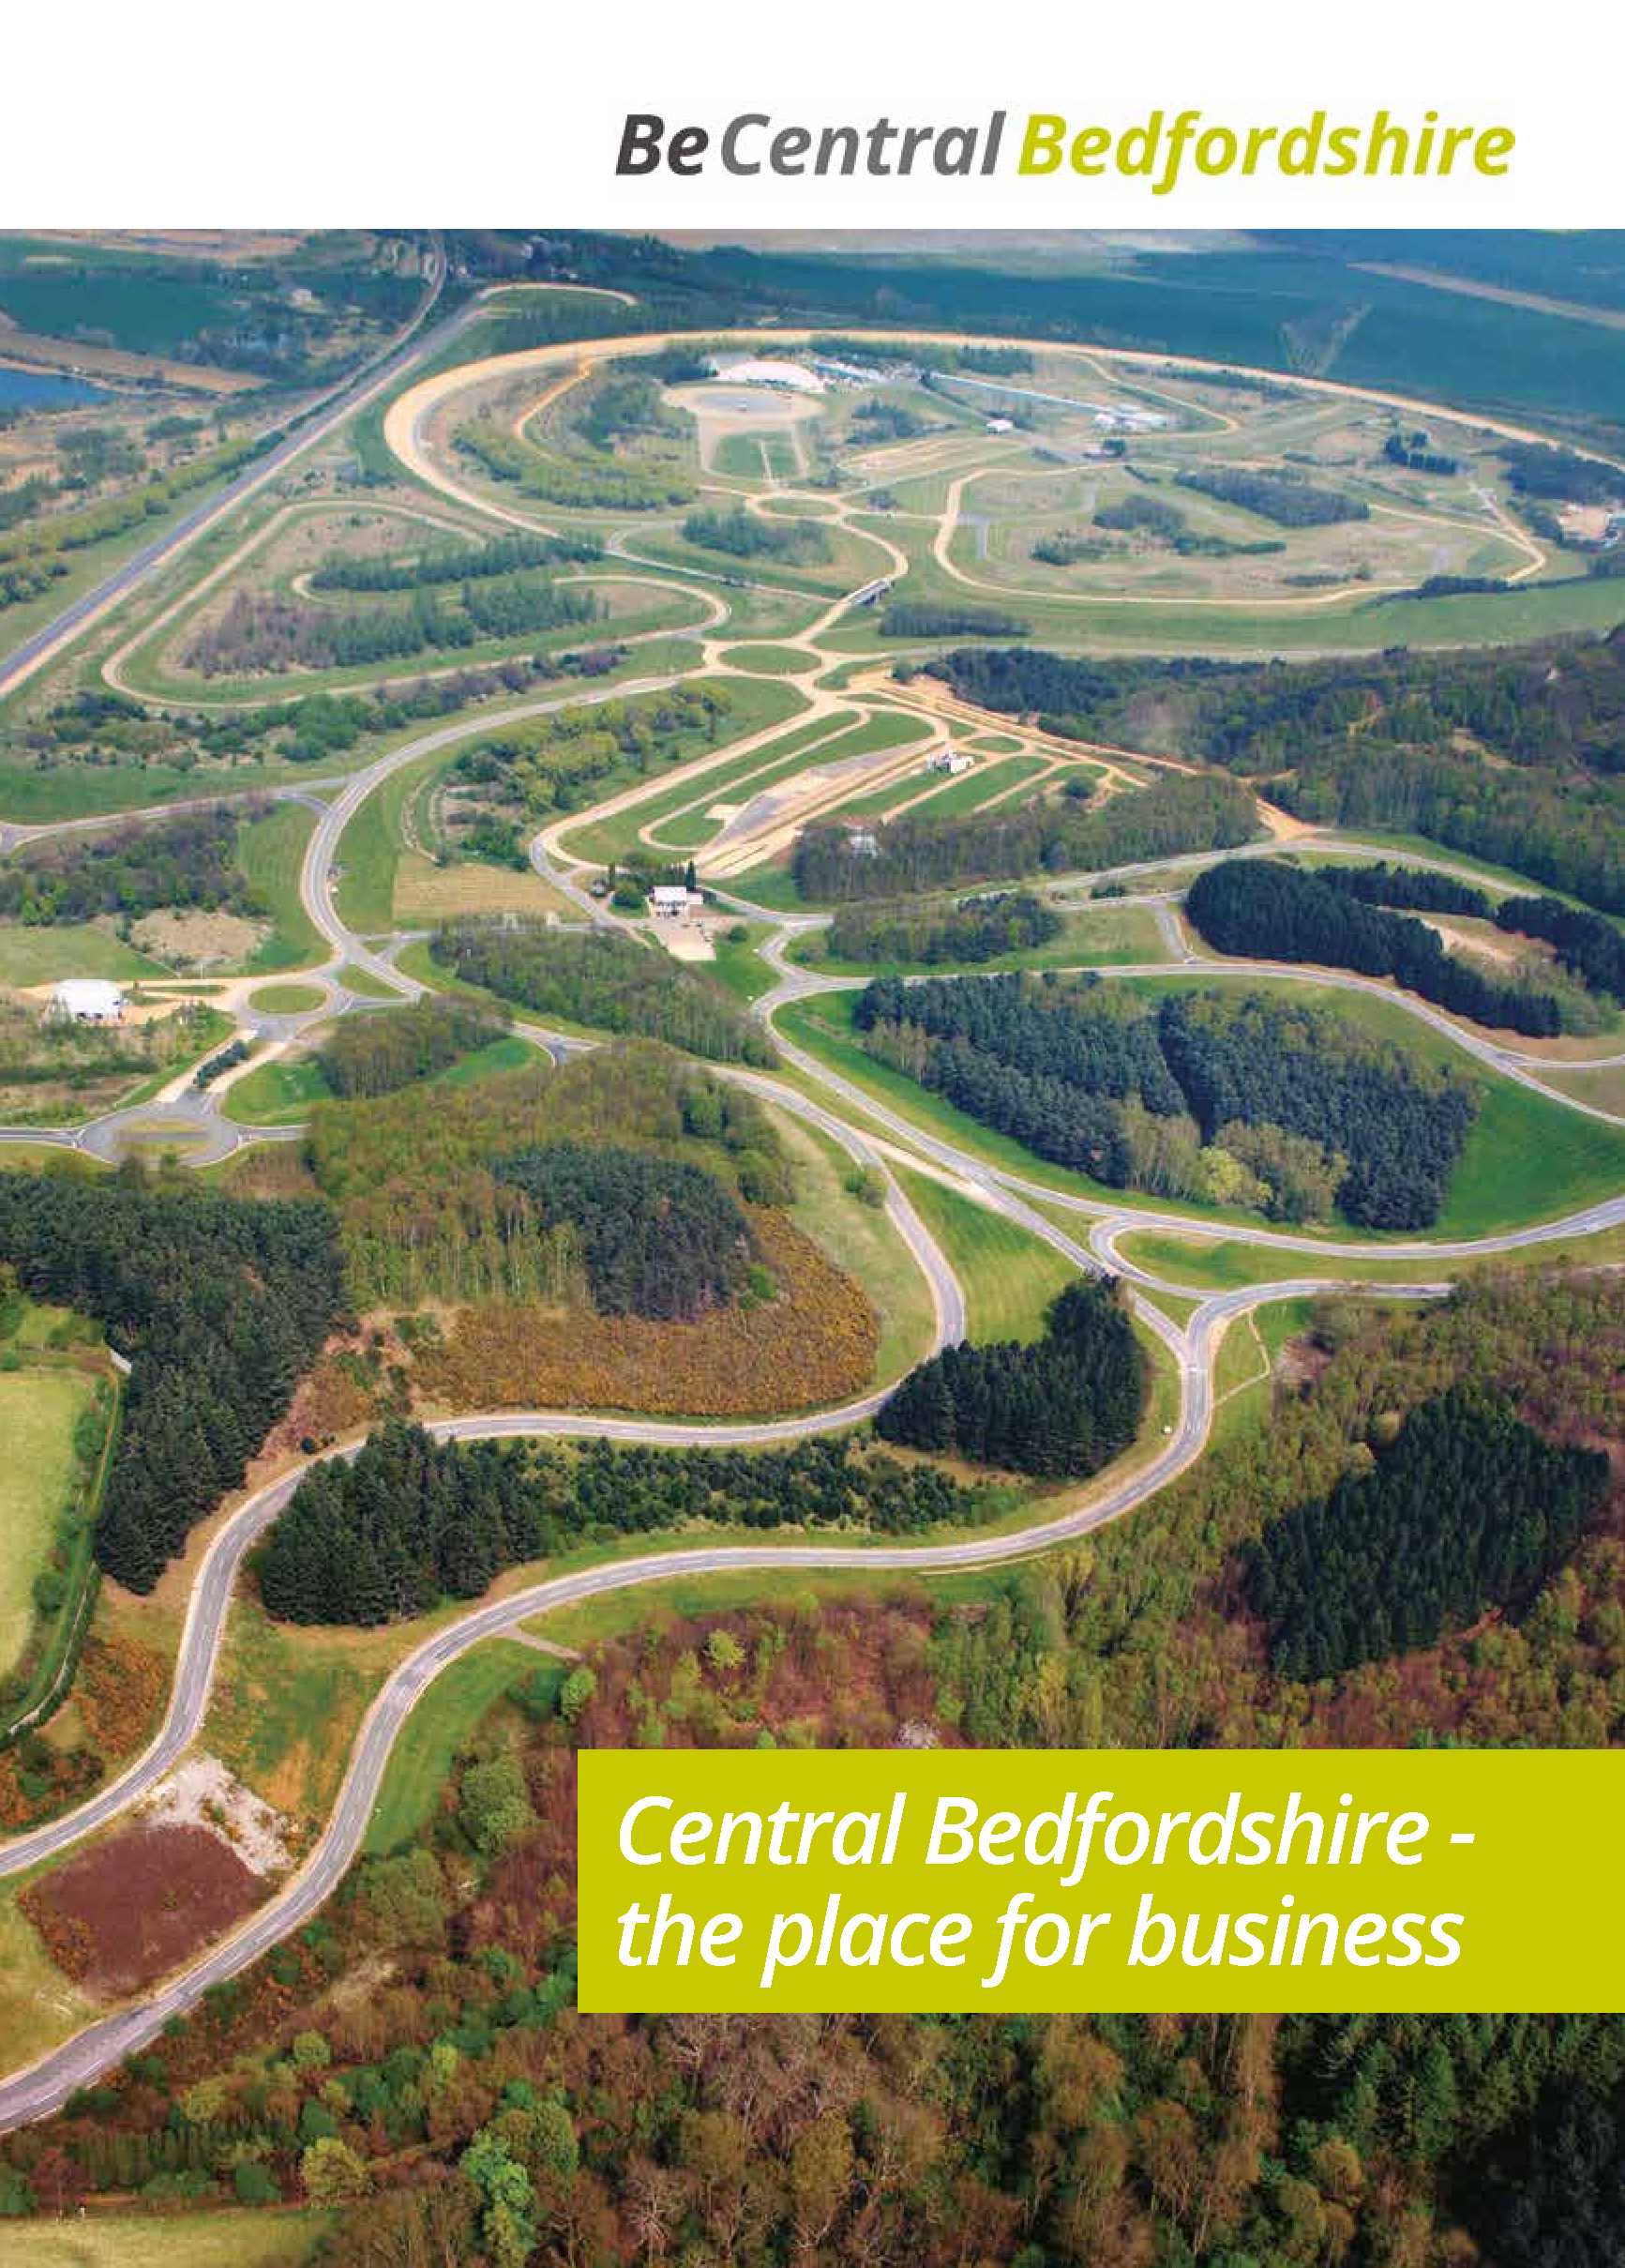 Central Bedfordshire - the place for business